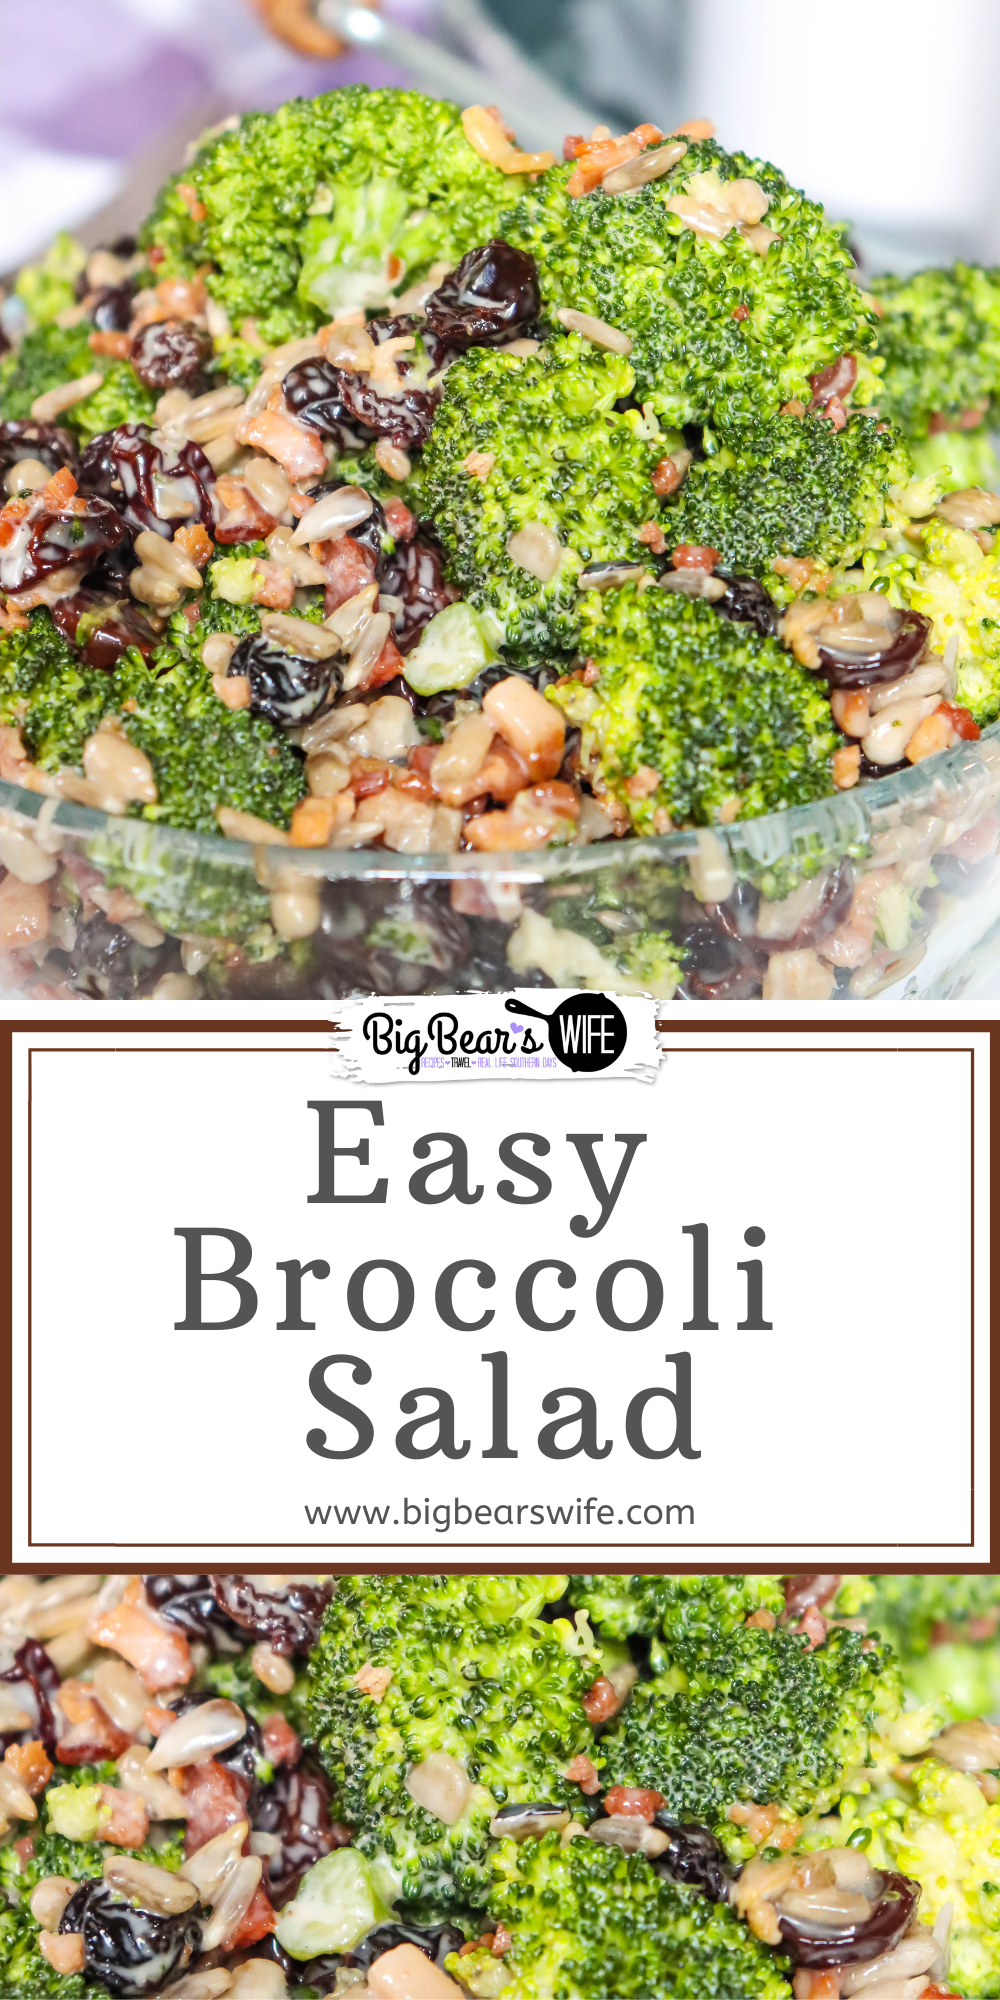 A perfectly Easy Broccoli Salad that's perfect as a side dish, great for picnics and perfect for cookouts! This make-ahead side dish is mixtures of  fresh broccoli, sunflower seeds, raisins and bacon bits that has been tossed in a sweet southern dressing and chilled!  via @bigbearswife